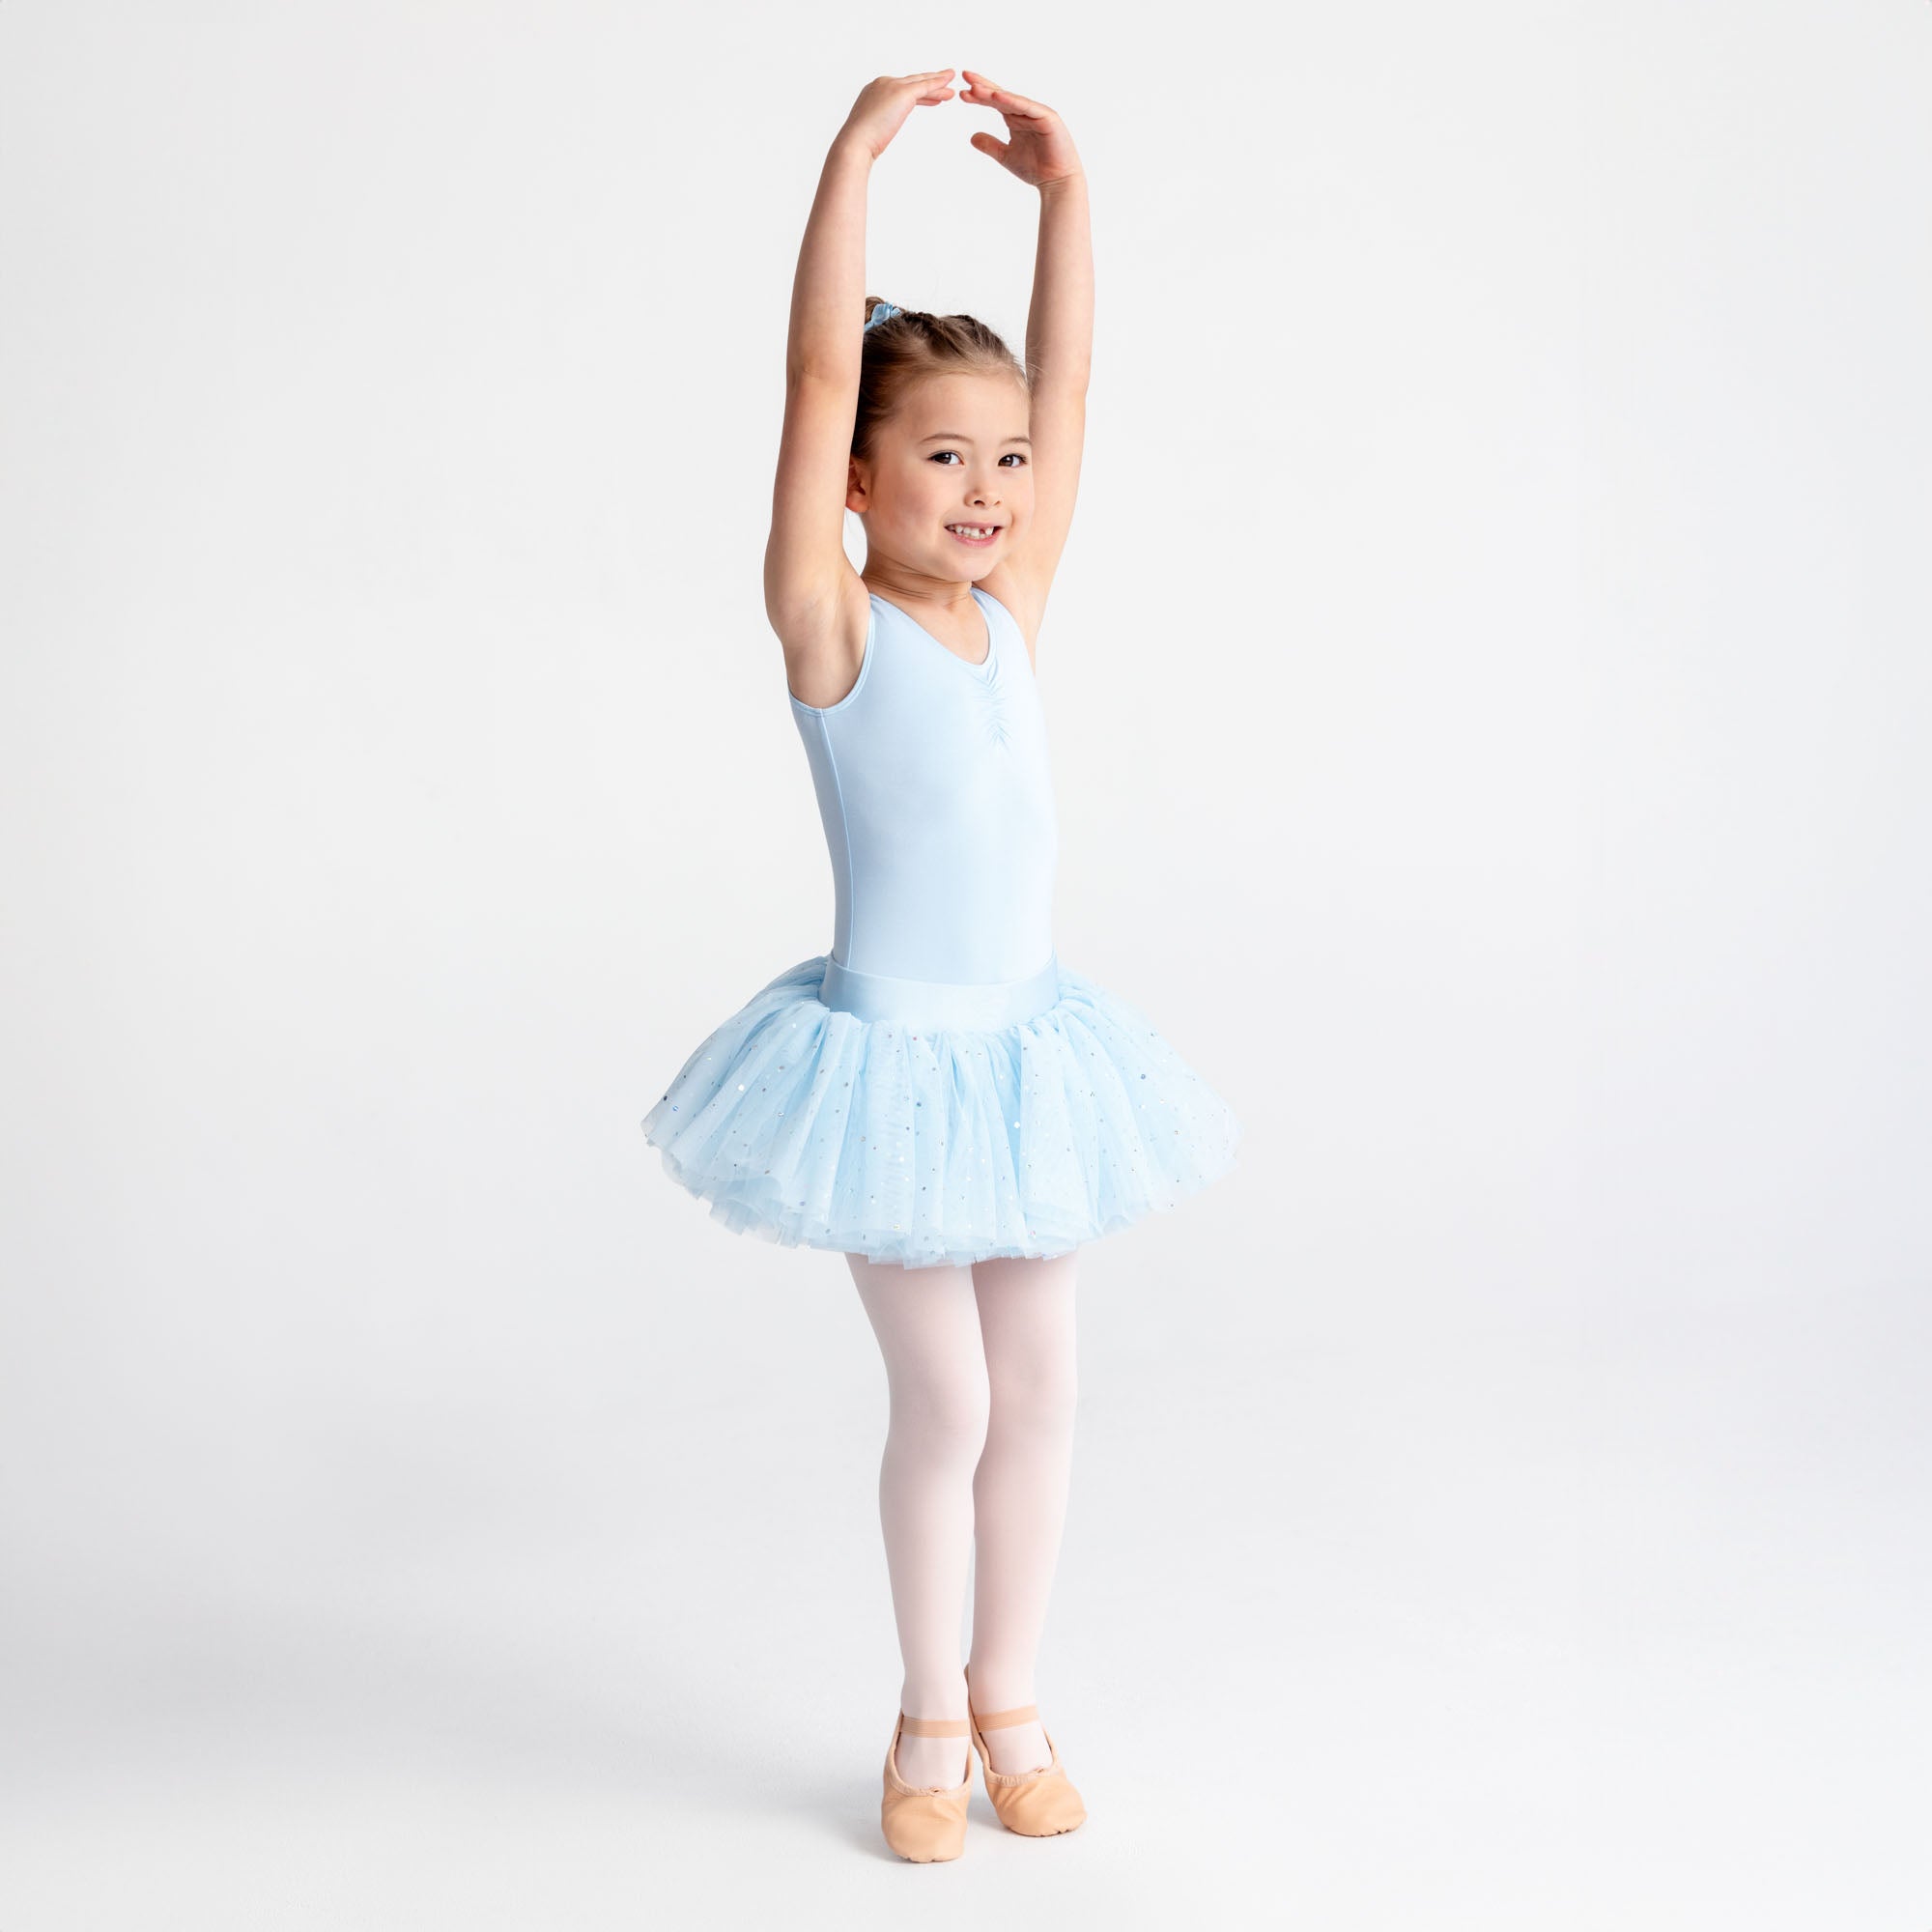 Flo Dancewear Girls Soft Tulle Ballet Tutu with Sequins in Blue